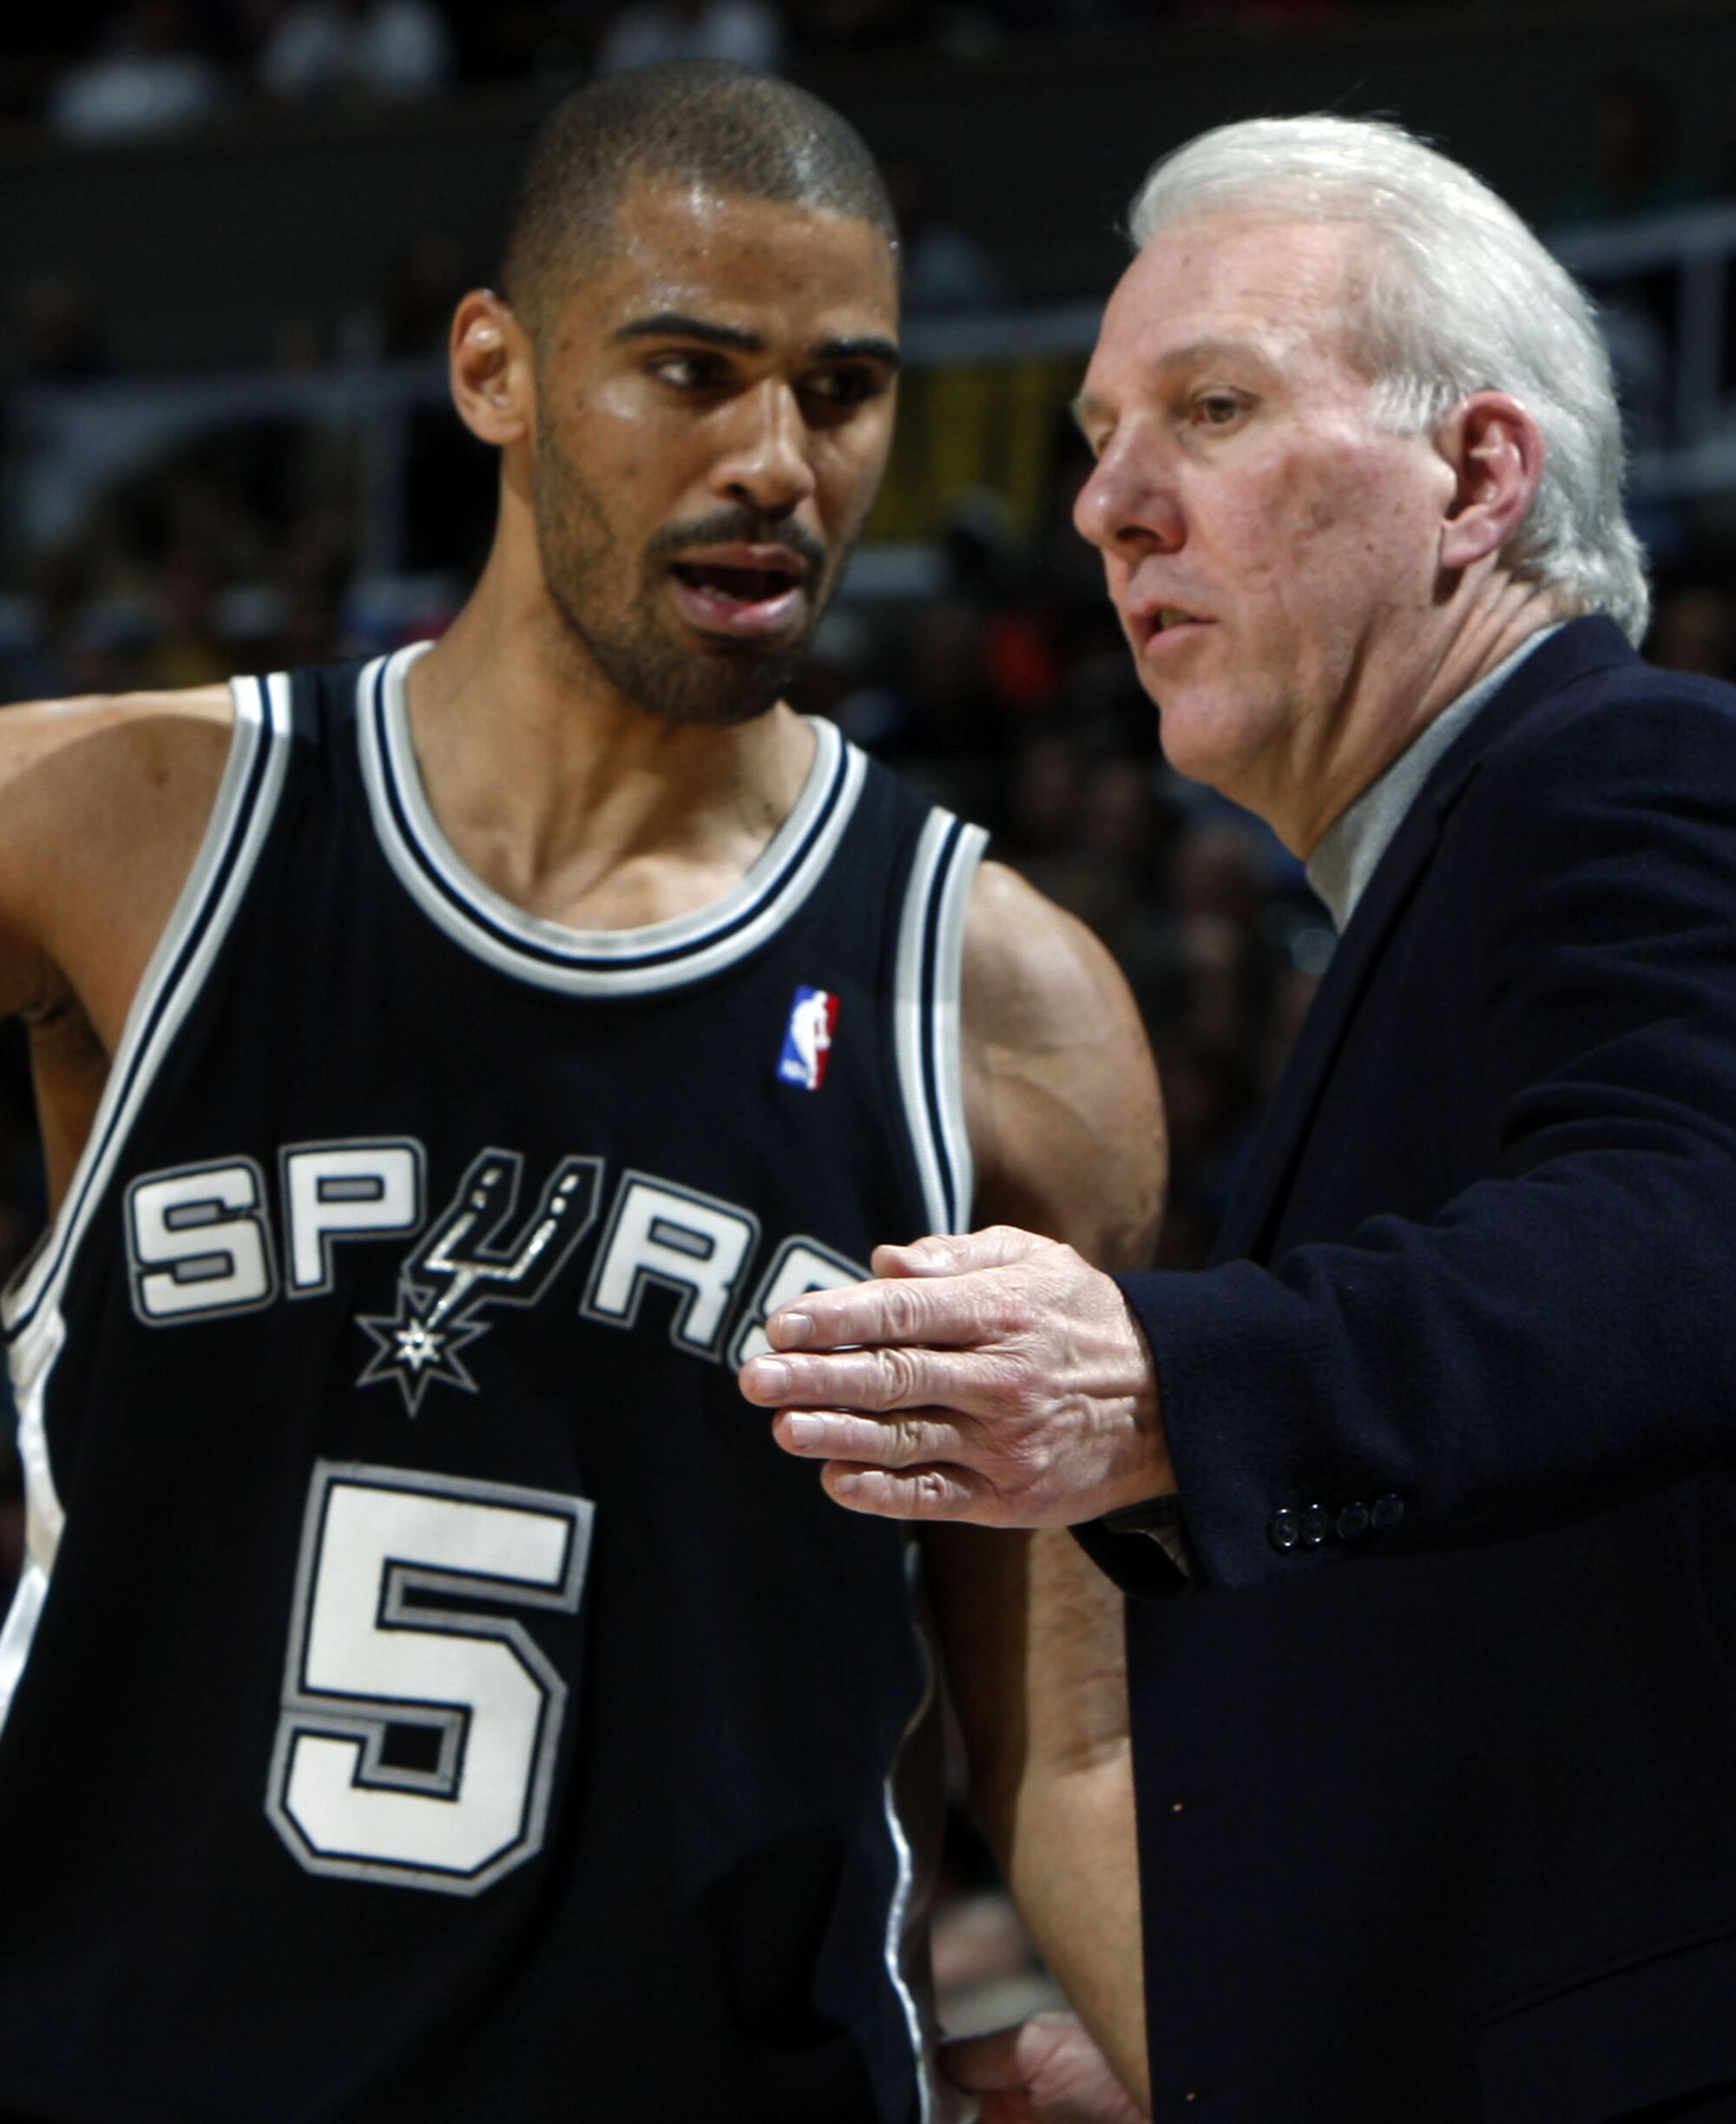 Spurs coach Gregg Popovich confers with guard Ime Udoka along the sideline during a game in 2008.